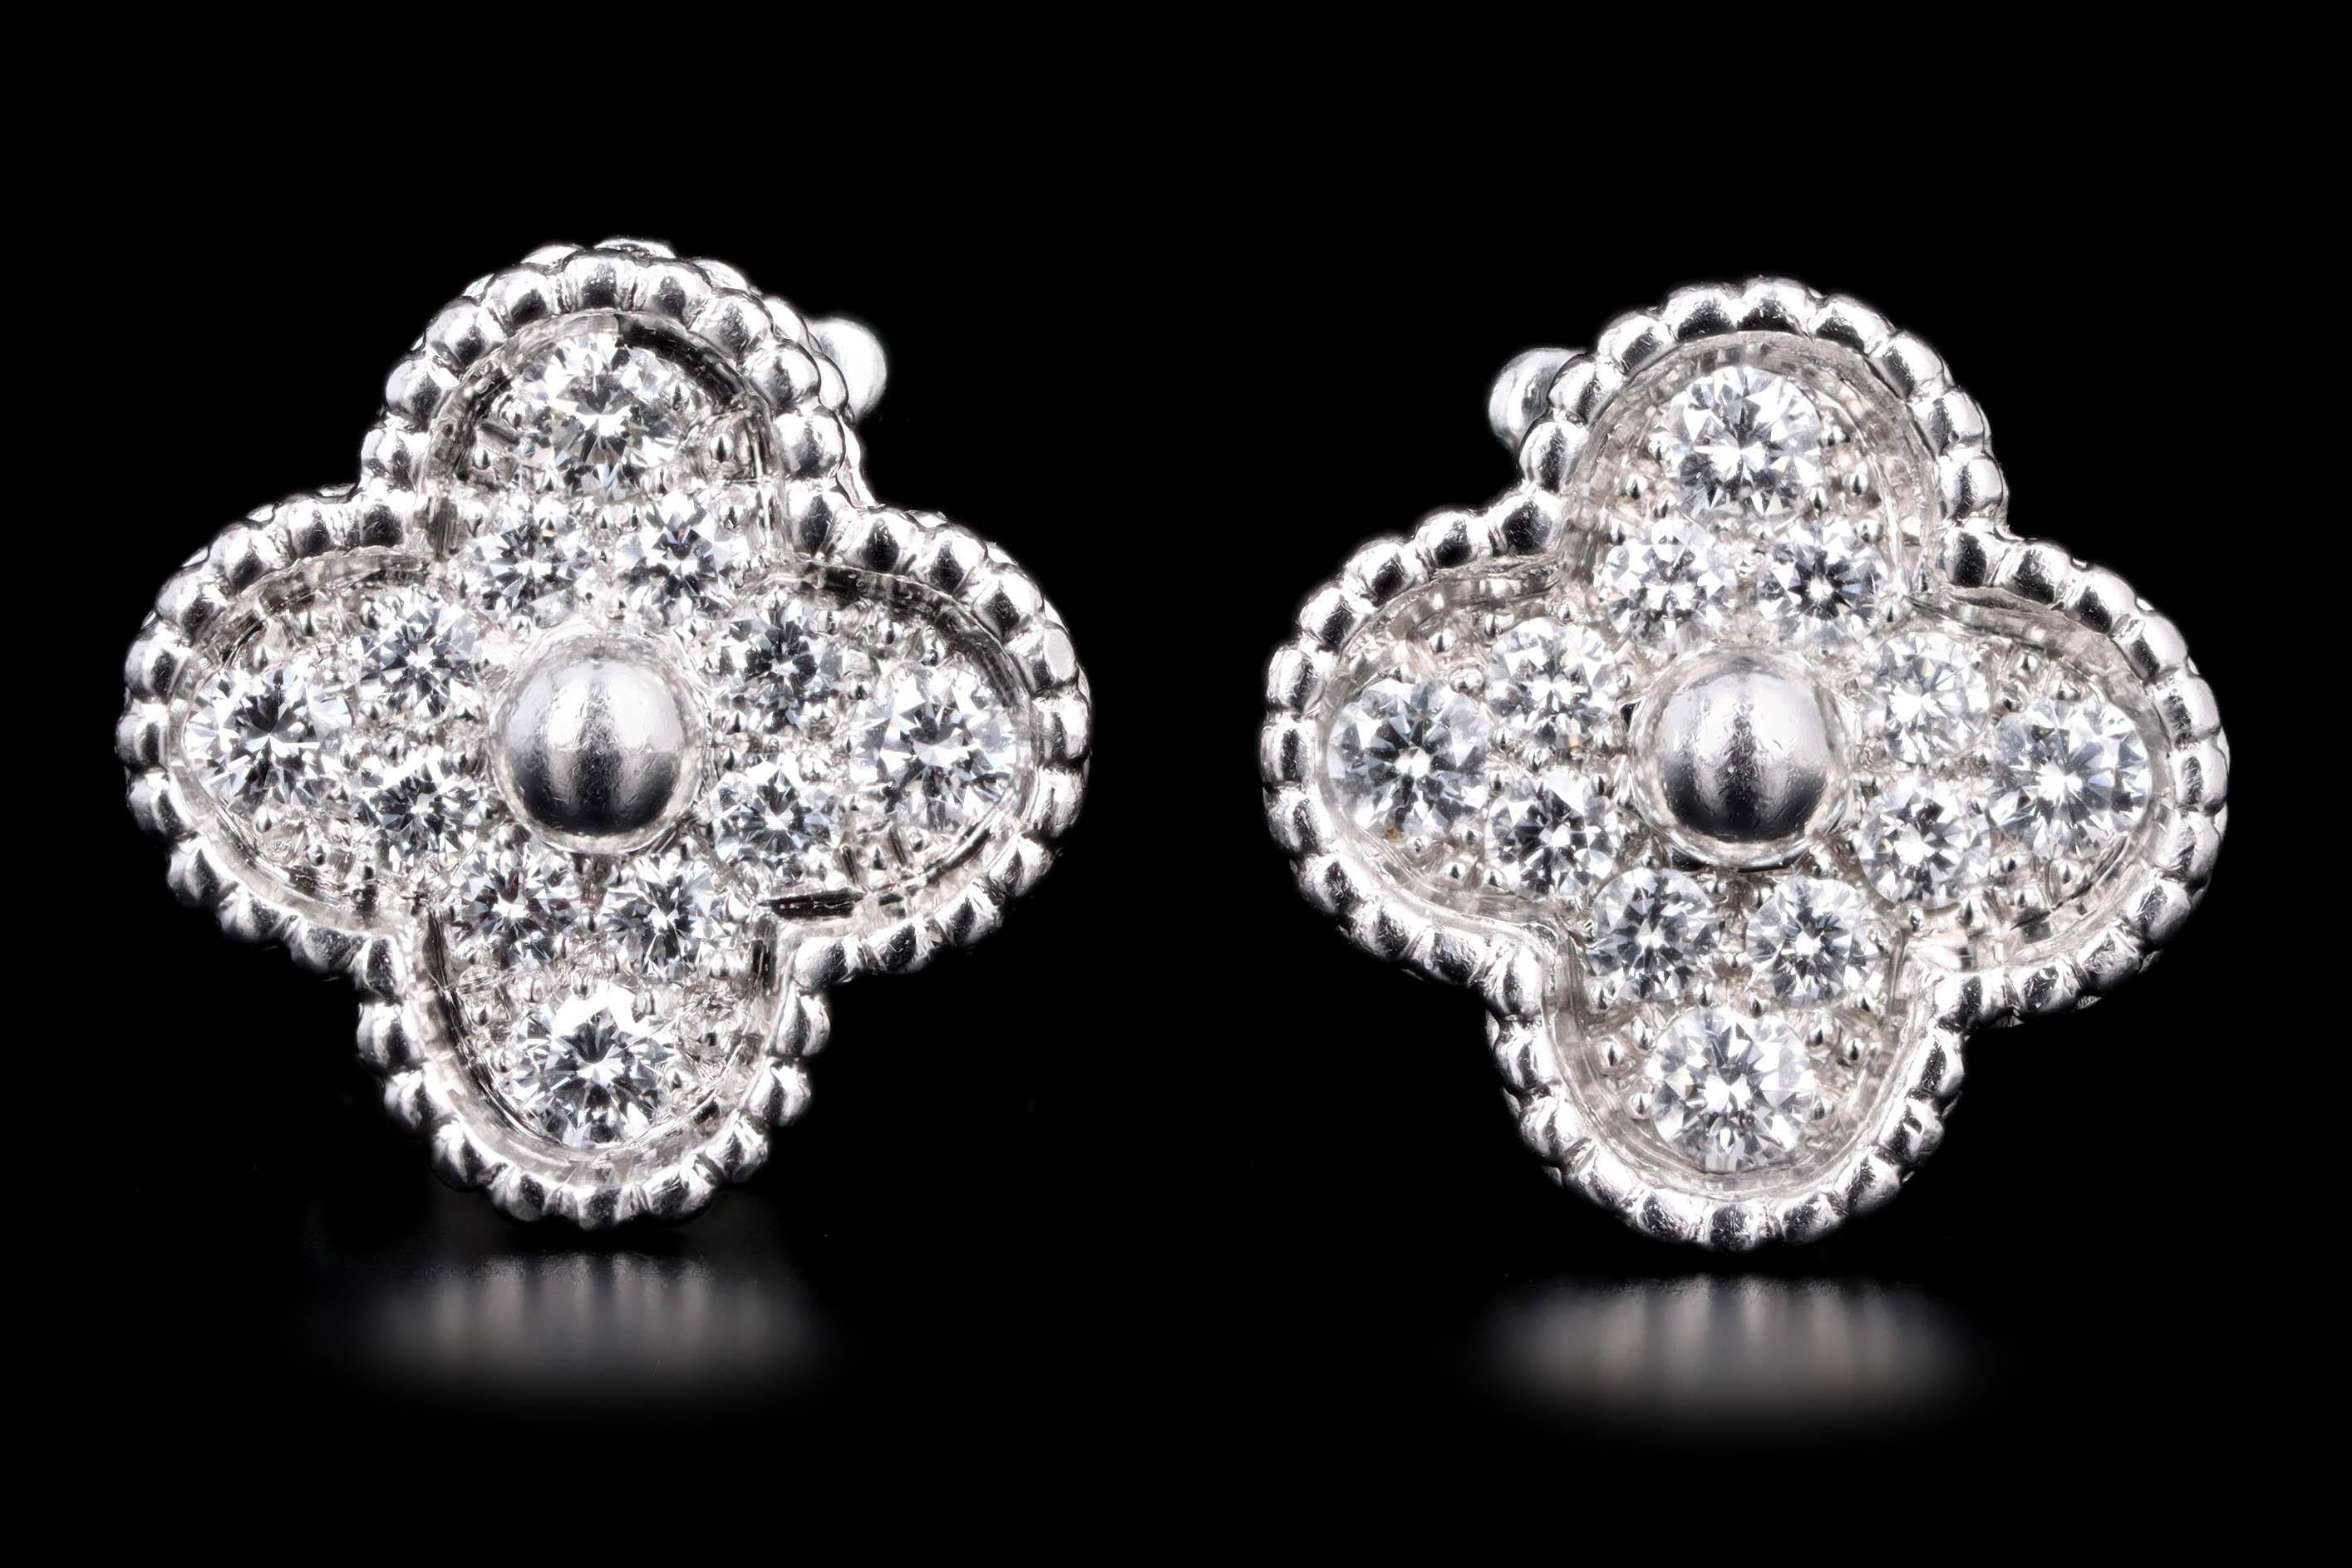 Designer: Van Cleef & Arpels

Composition: 18K White Gold

Primary Stone: Twenty Four Round Brilliant Cut Diamonds

Total Carat Weight: Approximately 1.0 Carats 

Color/Clarity: D-F / VVS1-2

Earring Dimensions:  0.6'' Length / 0.6'' Width

Earring